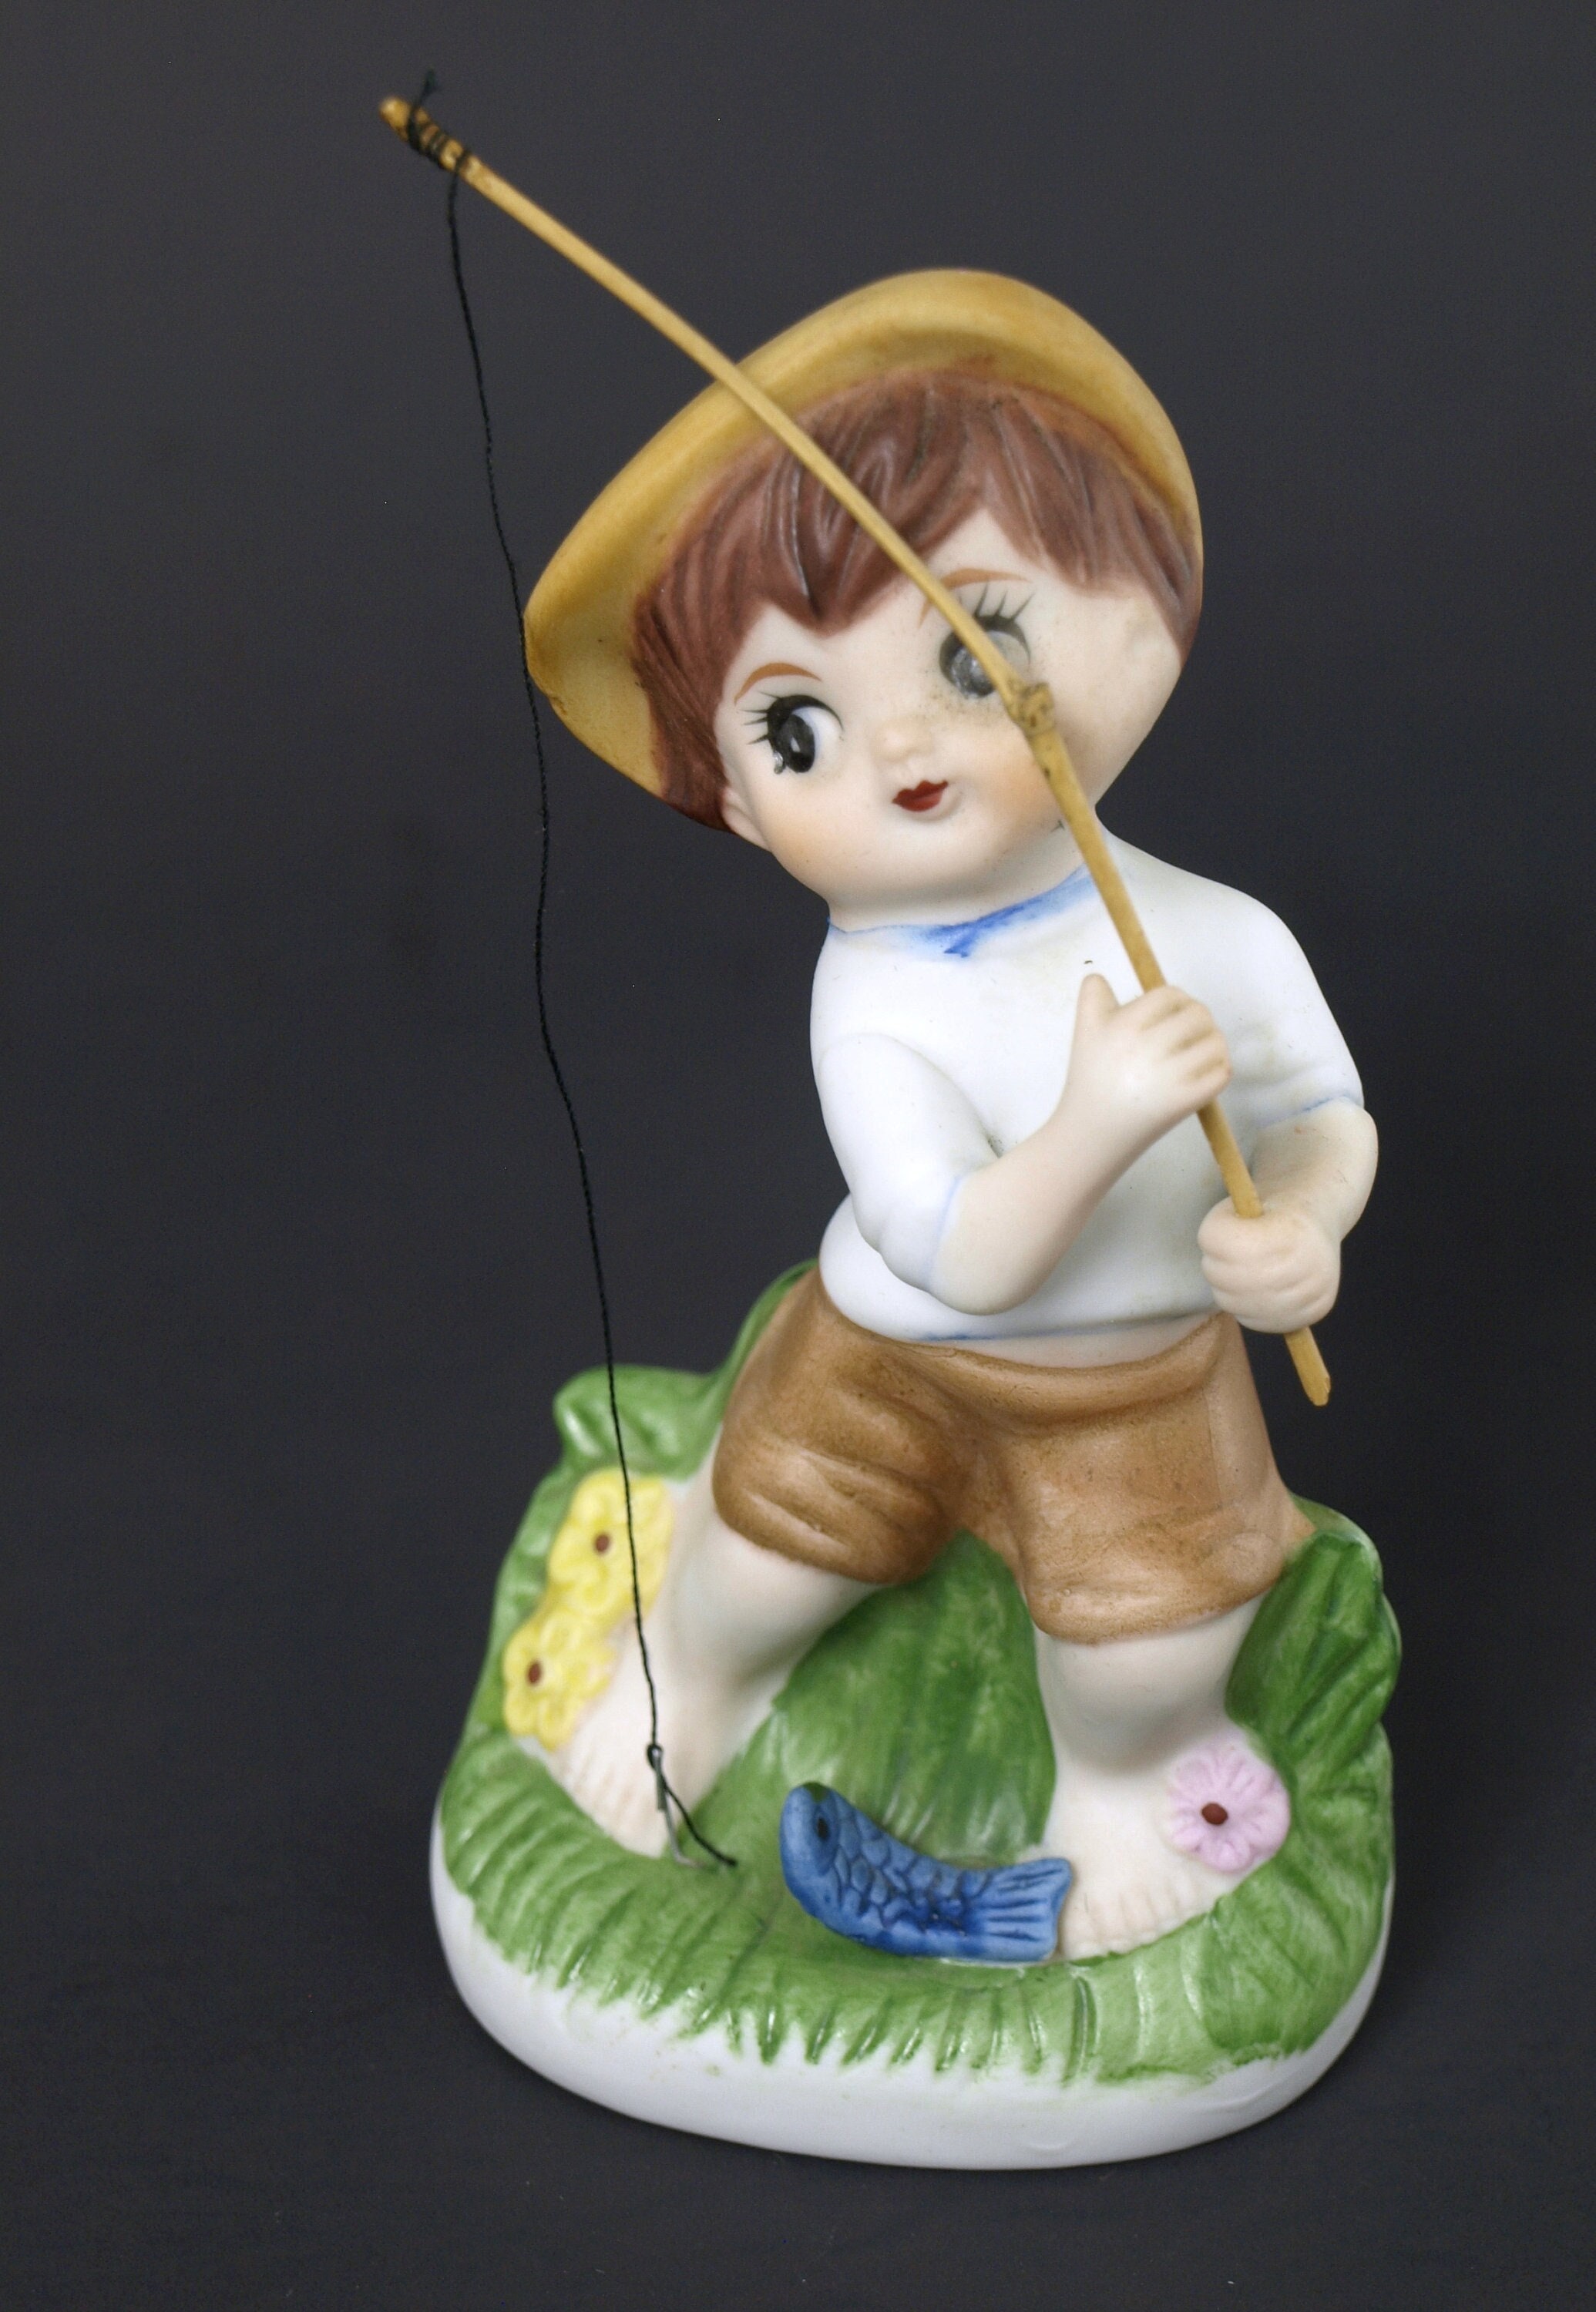 Vintage Mid Century Porcelain Bisque Figurine of a Young Boy with Fishing  Pole - Made in Korea, Circa 1960's - Excellent Condition